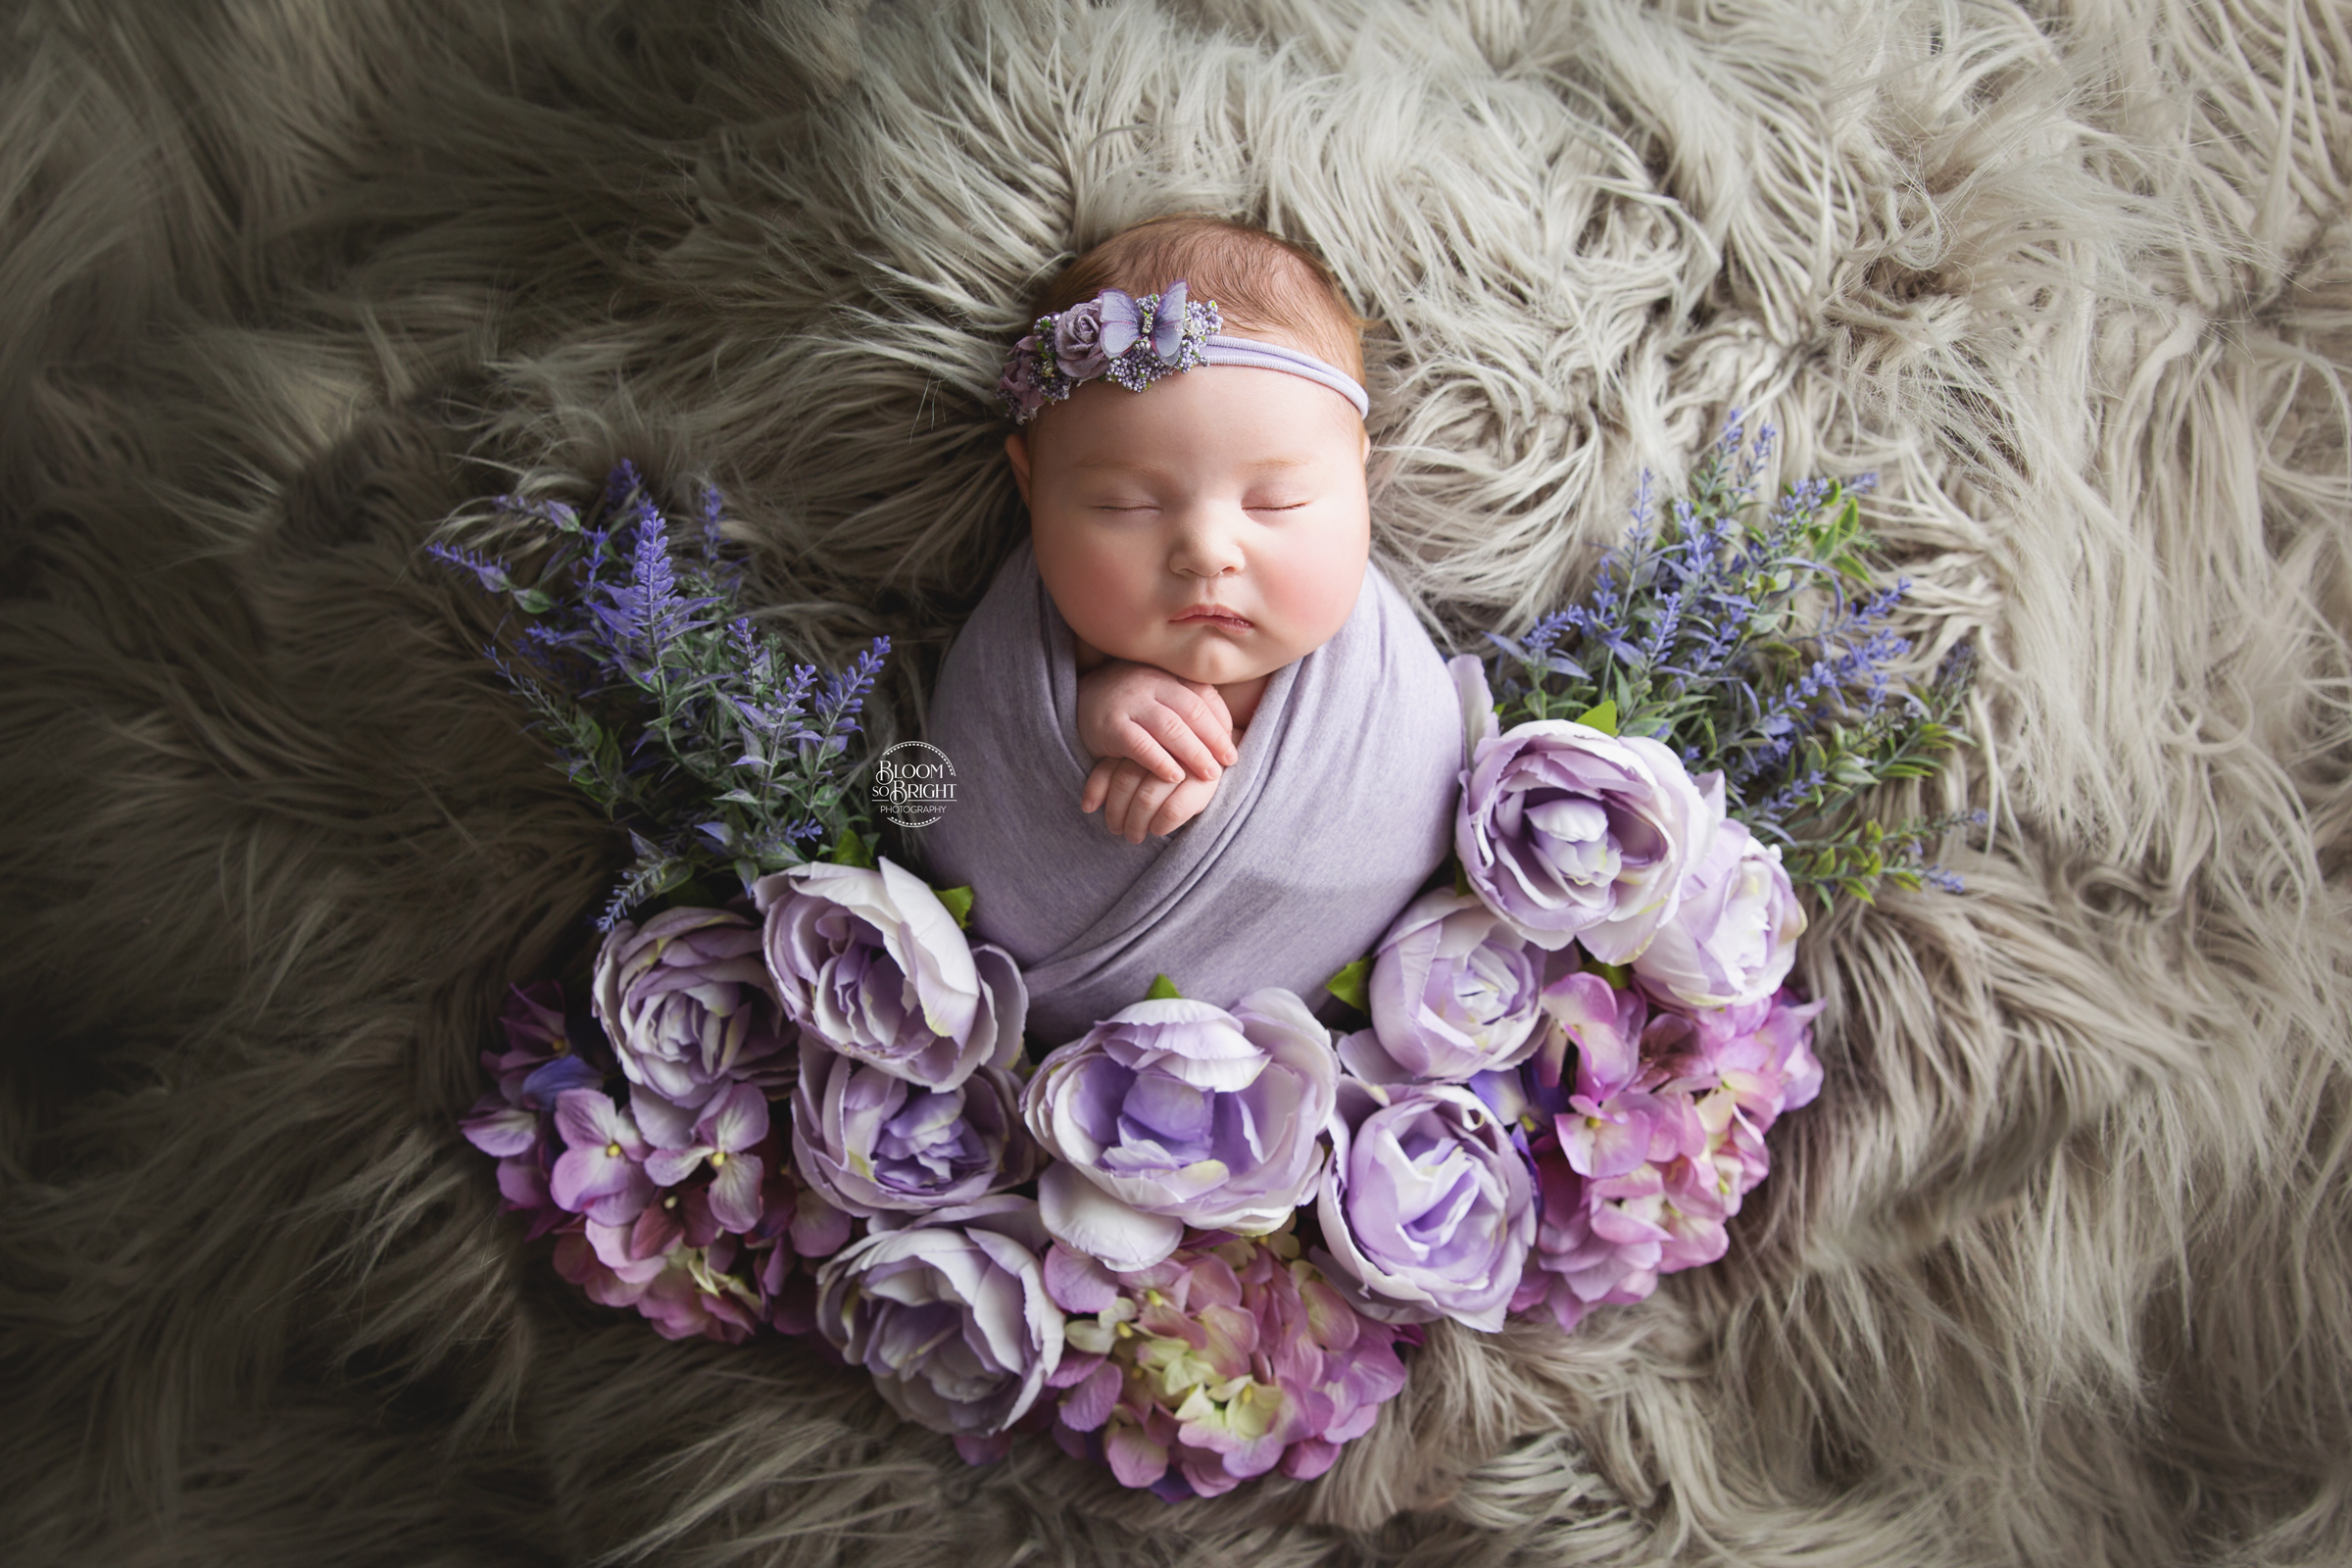 Newborn on gray flokati with lavender and pink flowers